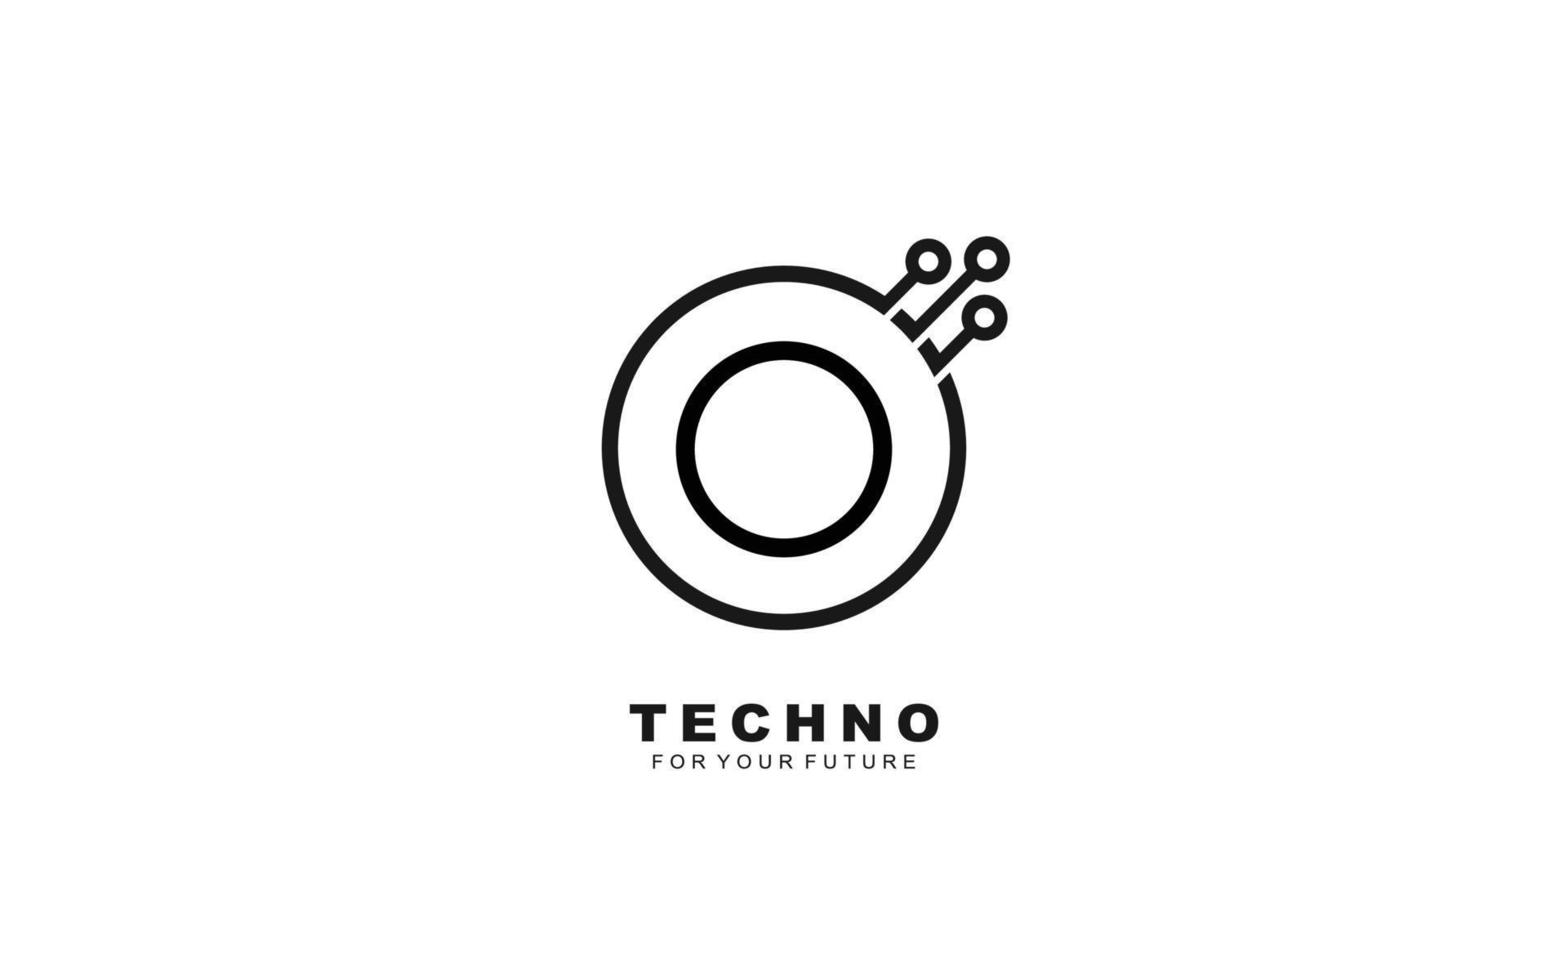 O logo TECHNO for identity. Letter template vector illustration for your brand